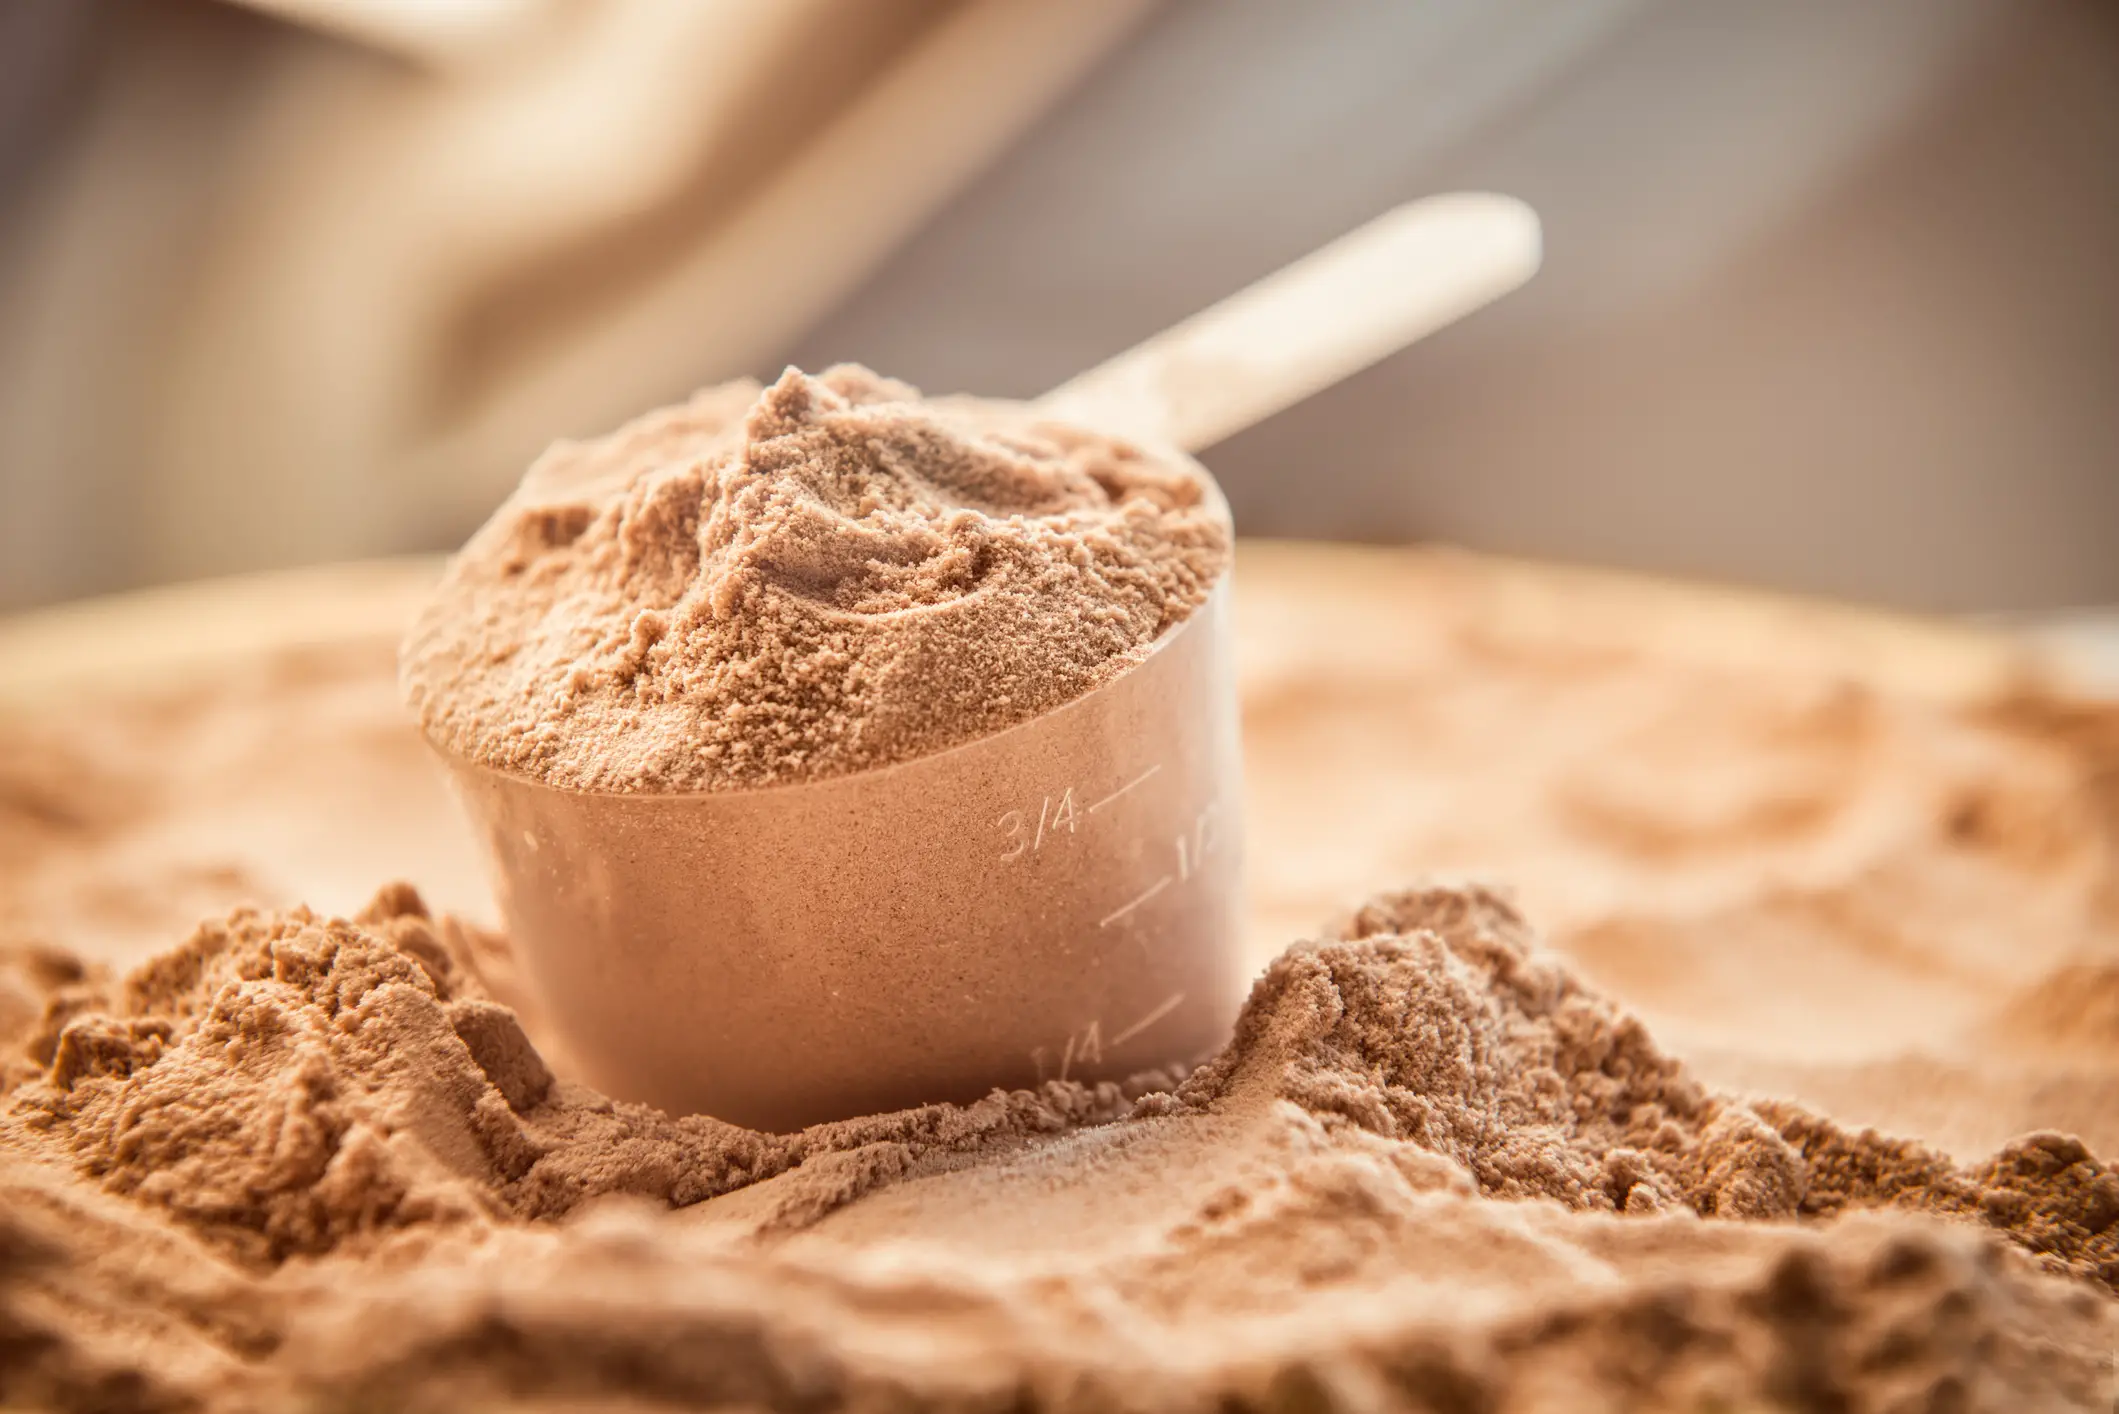 A scoop of chocolate whey isolate protein used to help get a six pack